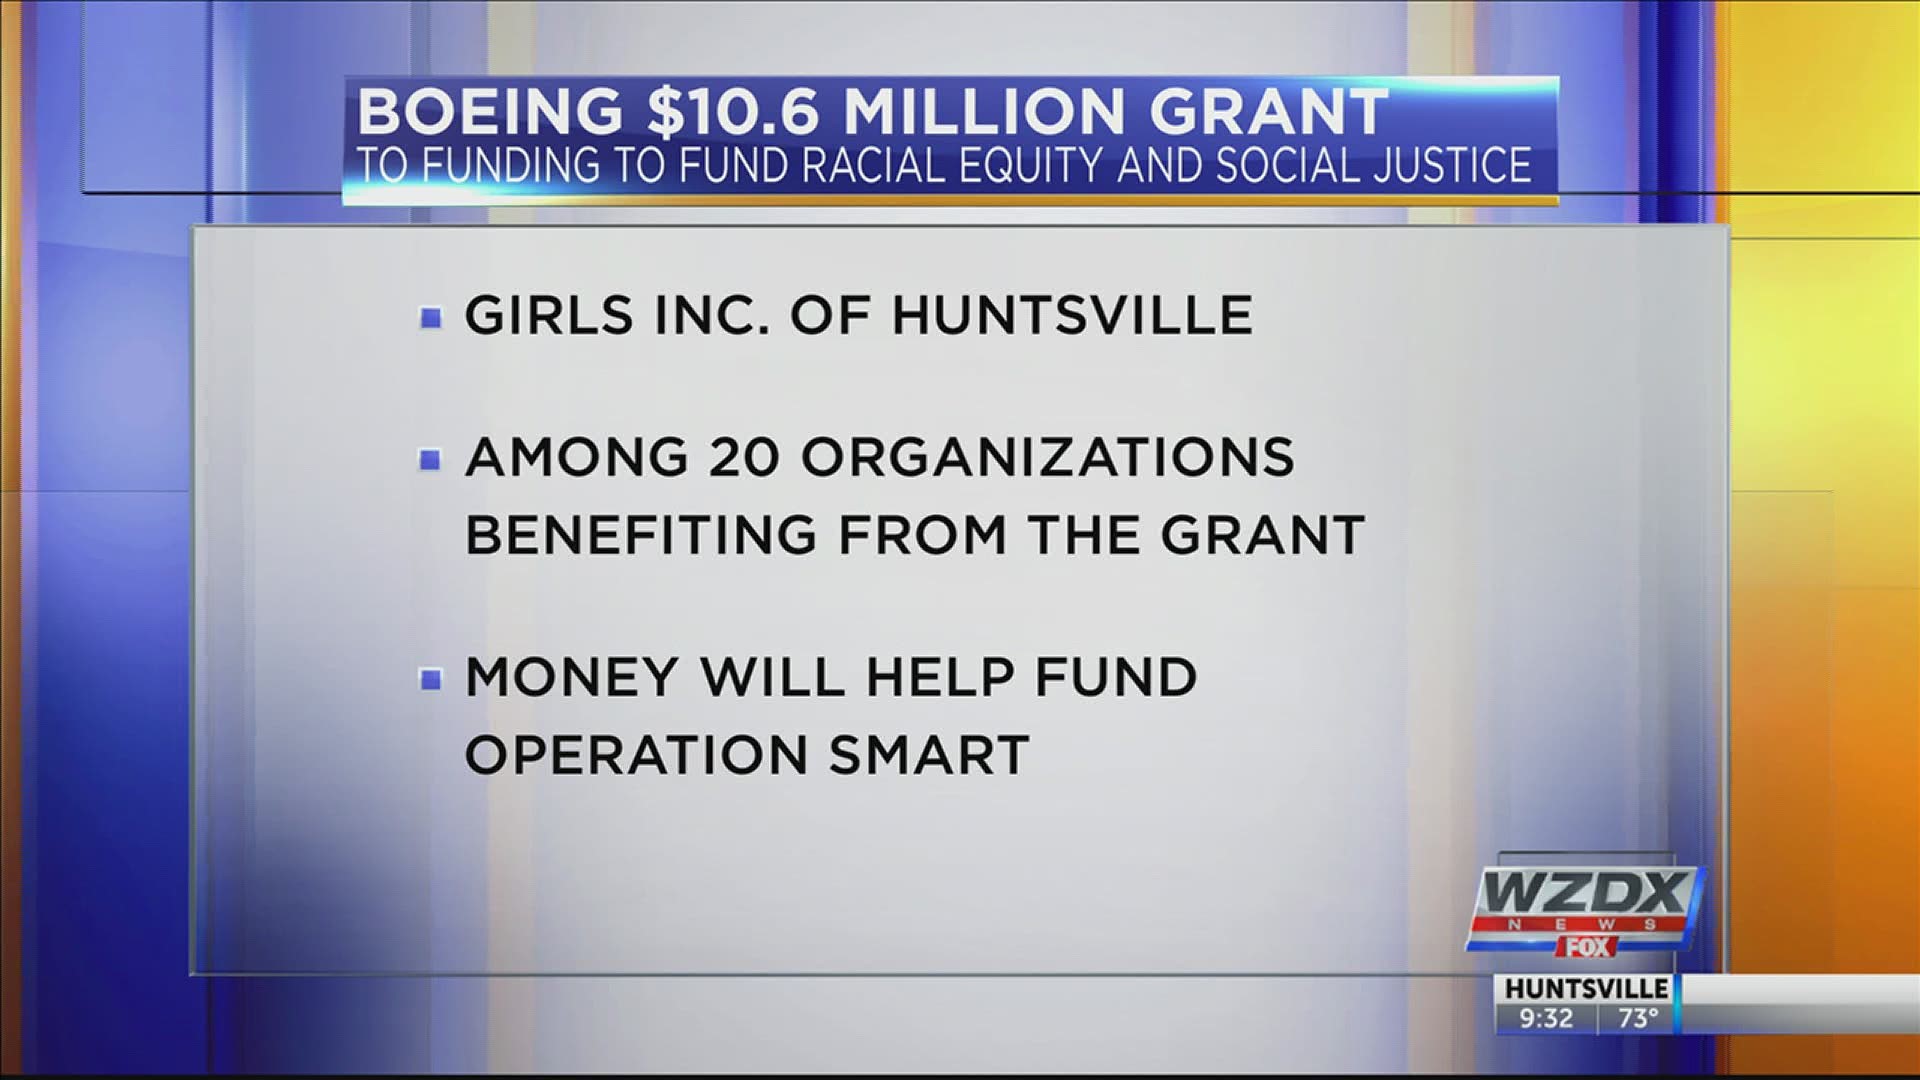 Operation Smart, operated by Girls, Inc. of Huntsville, will get a share of $10.6 million in grants from Boeing for its STEM education program for girls.